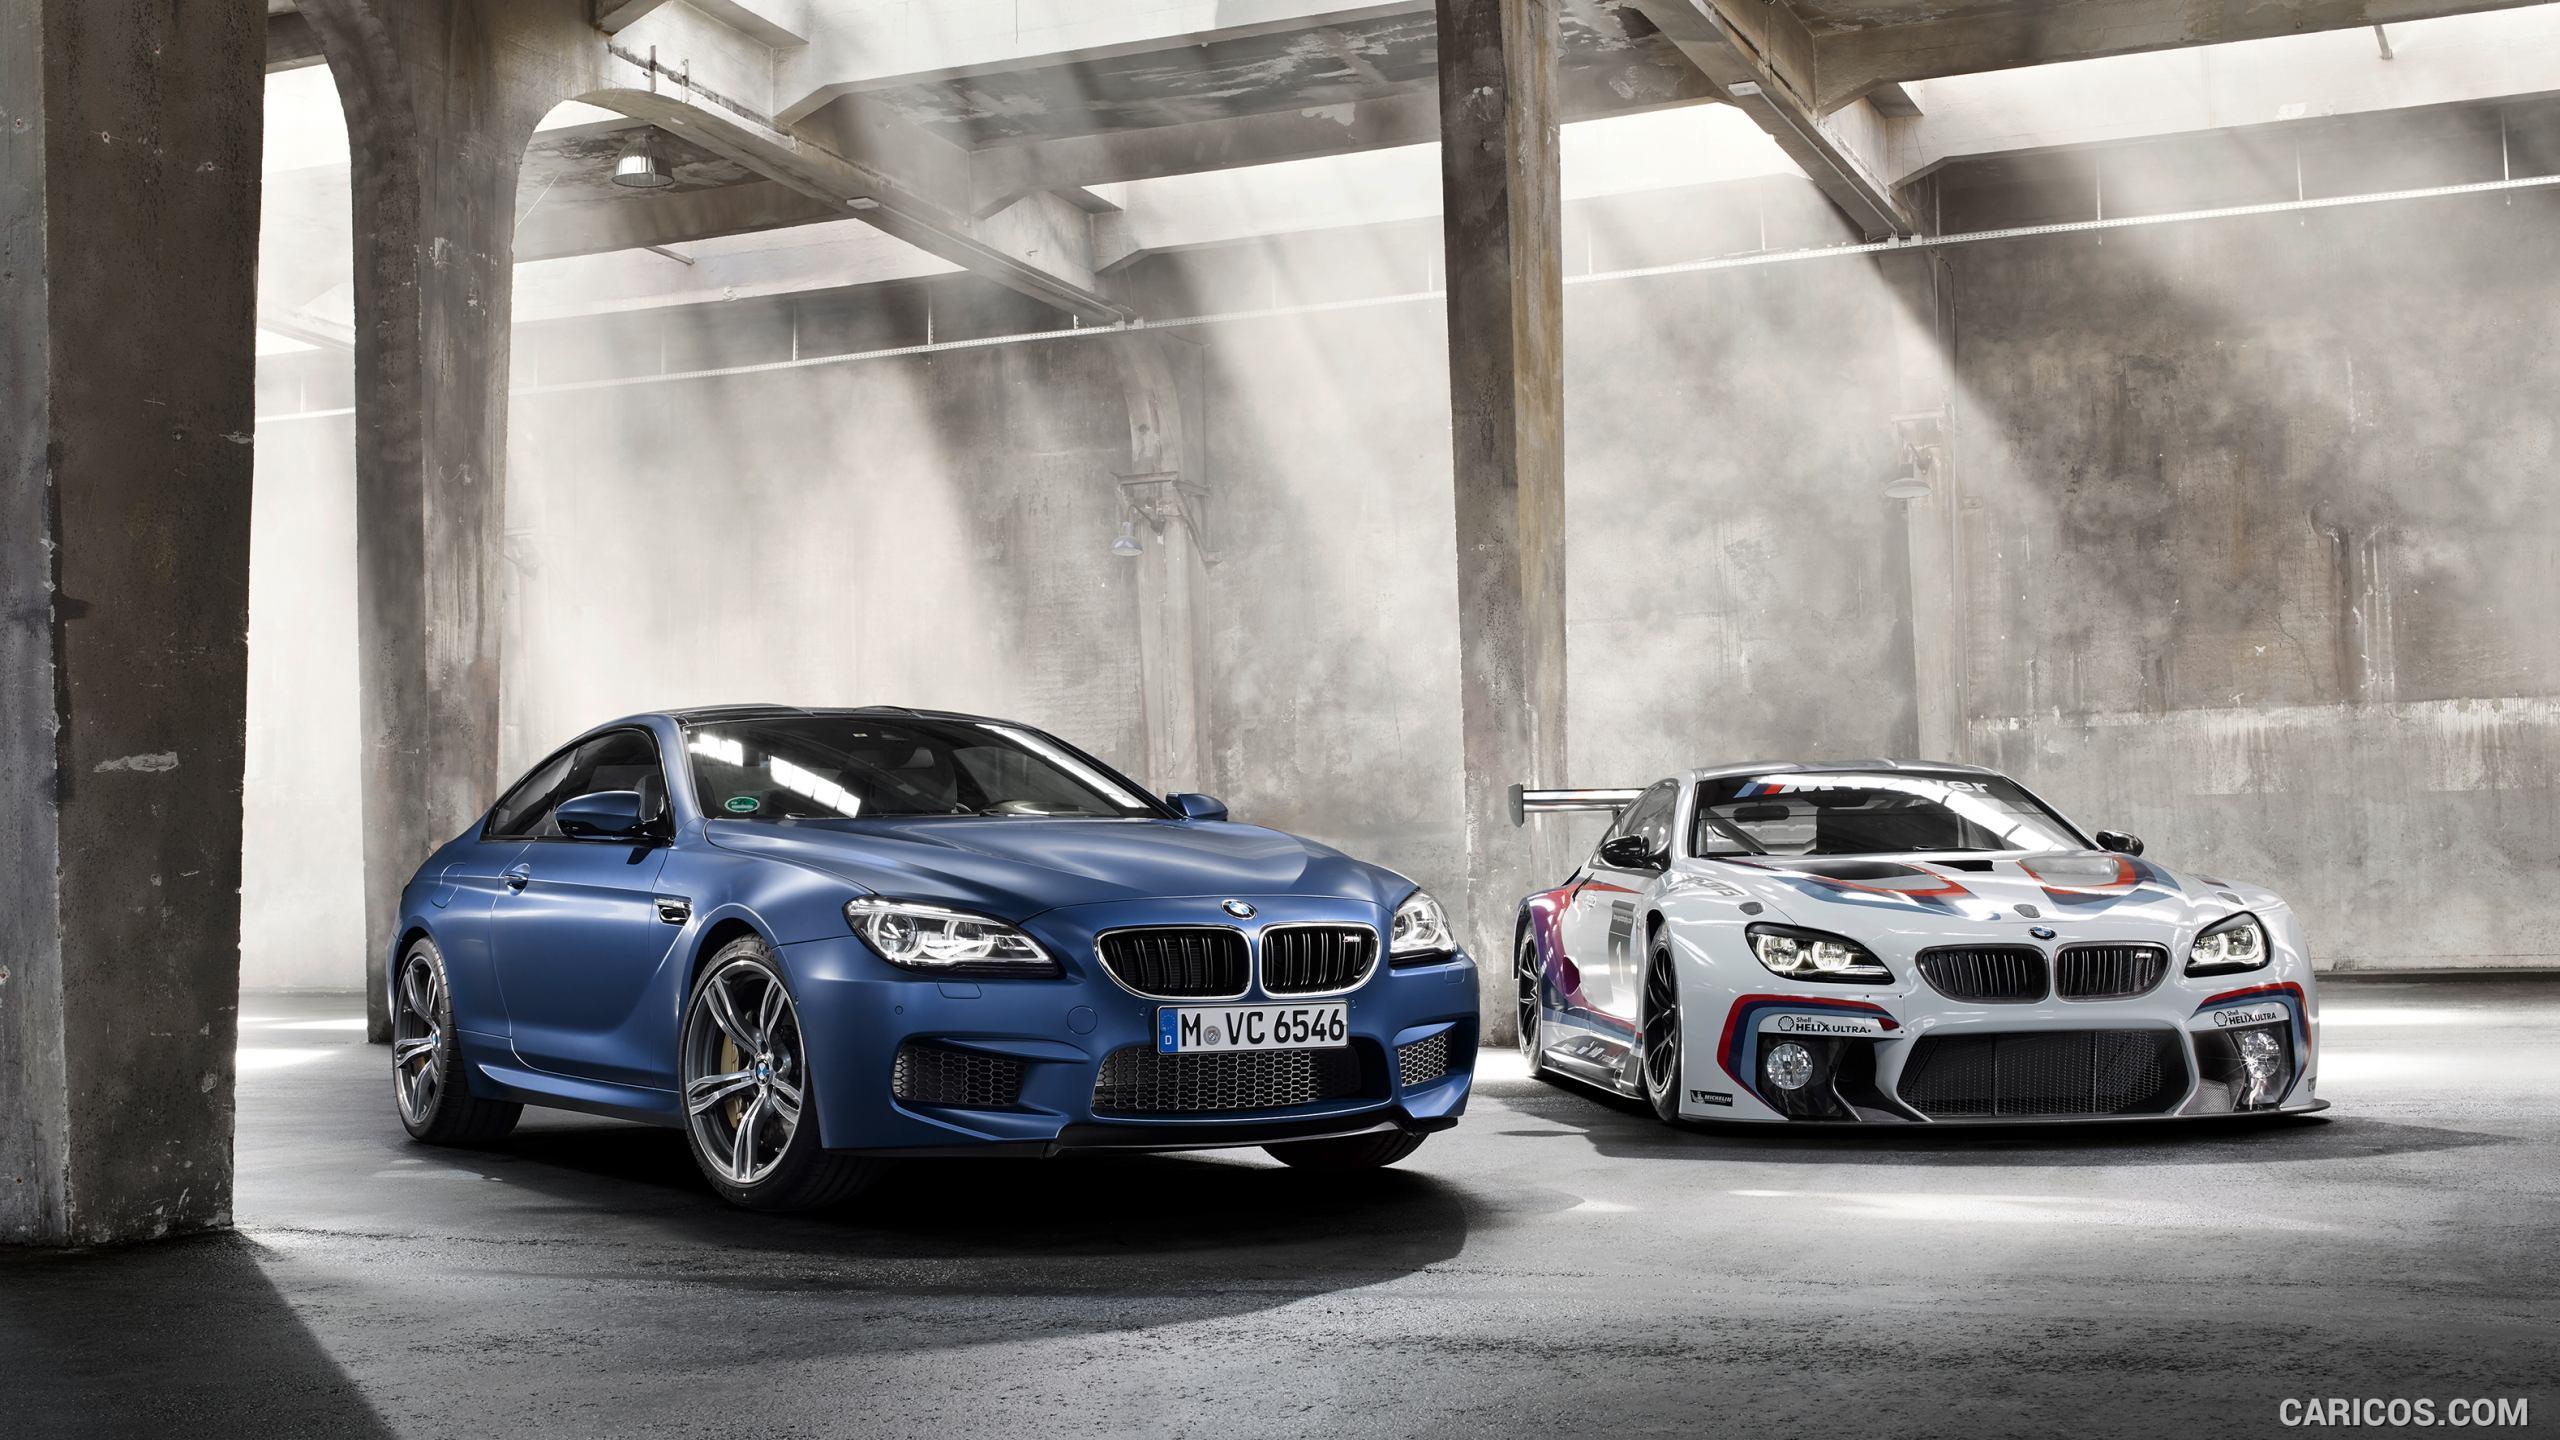 BMW M6 GT3 and BMW M6 Coupe. HD Wallpaper